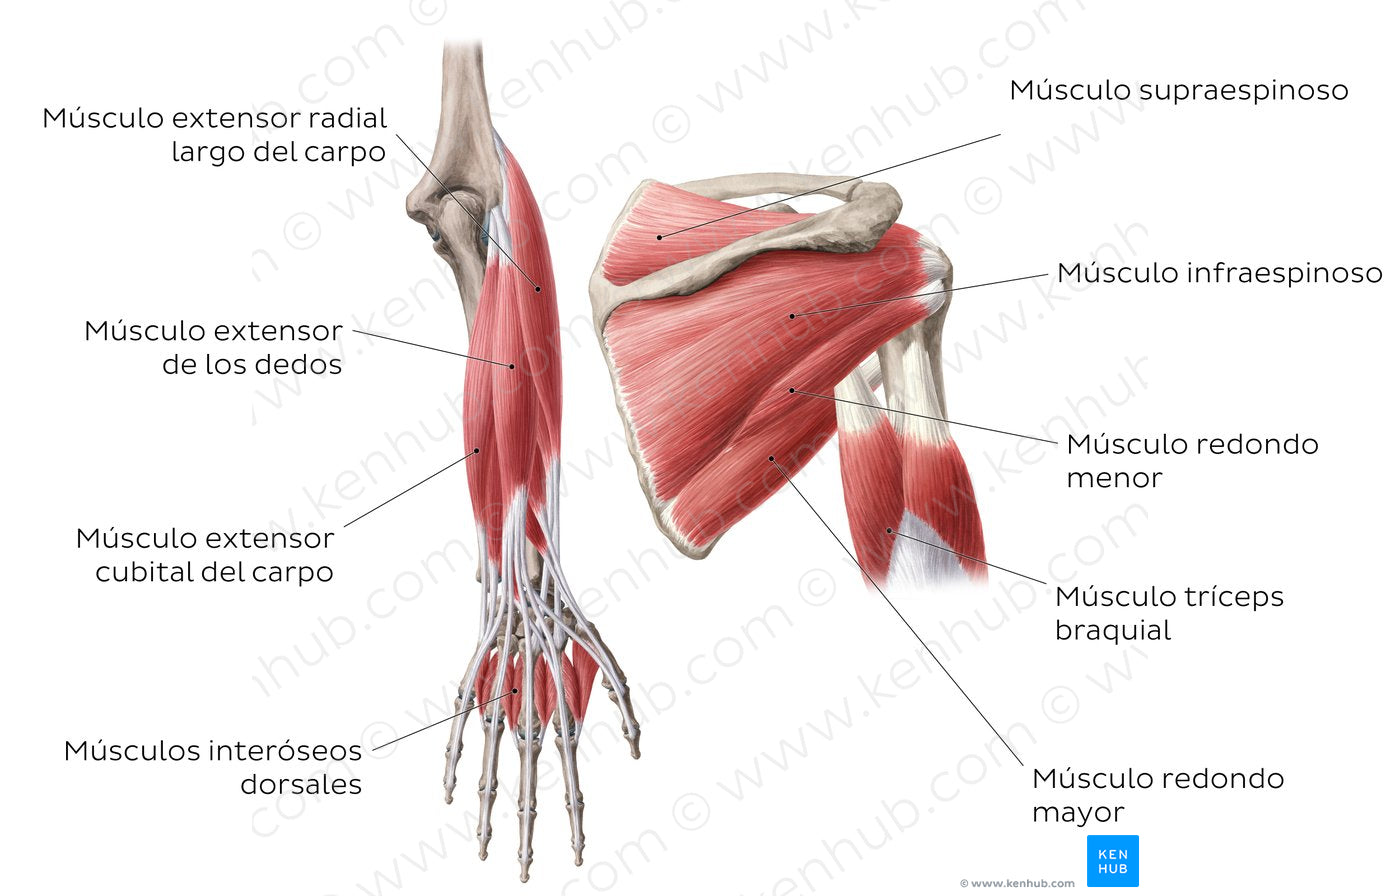 Main muscles of the upper limb - posterior (Spanish)